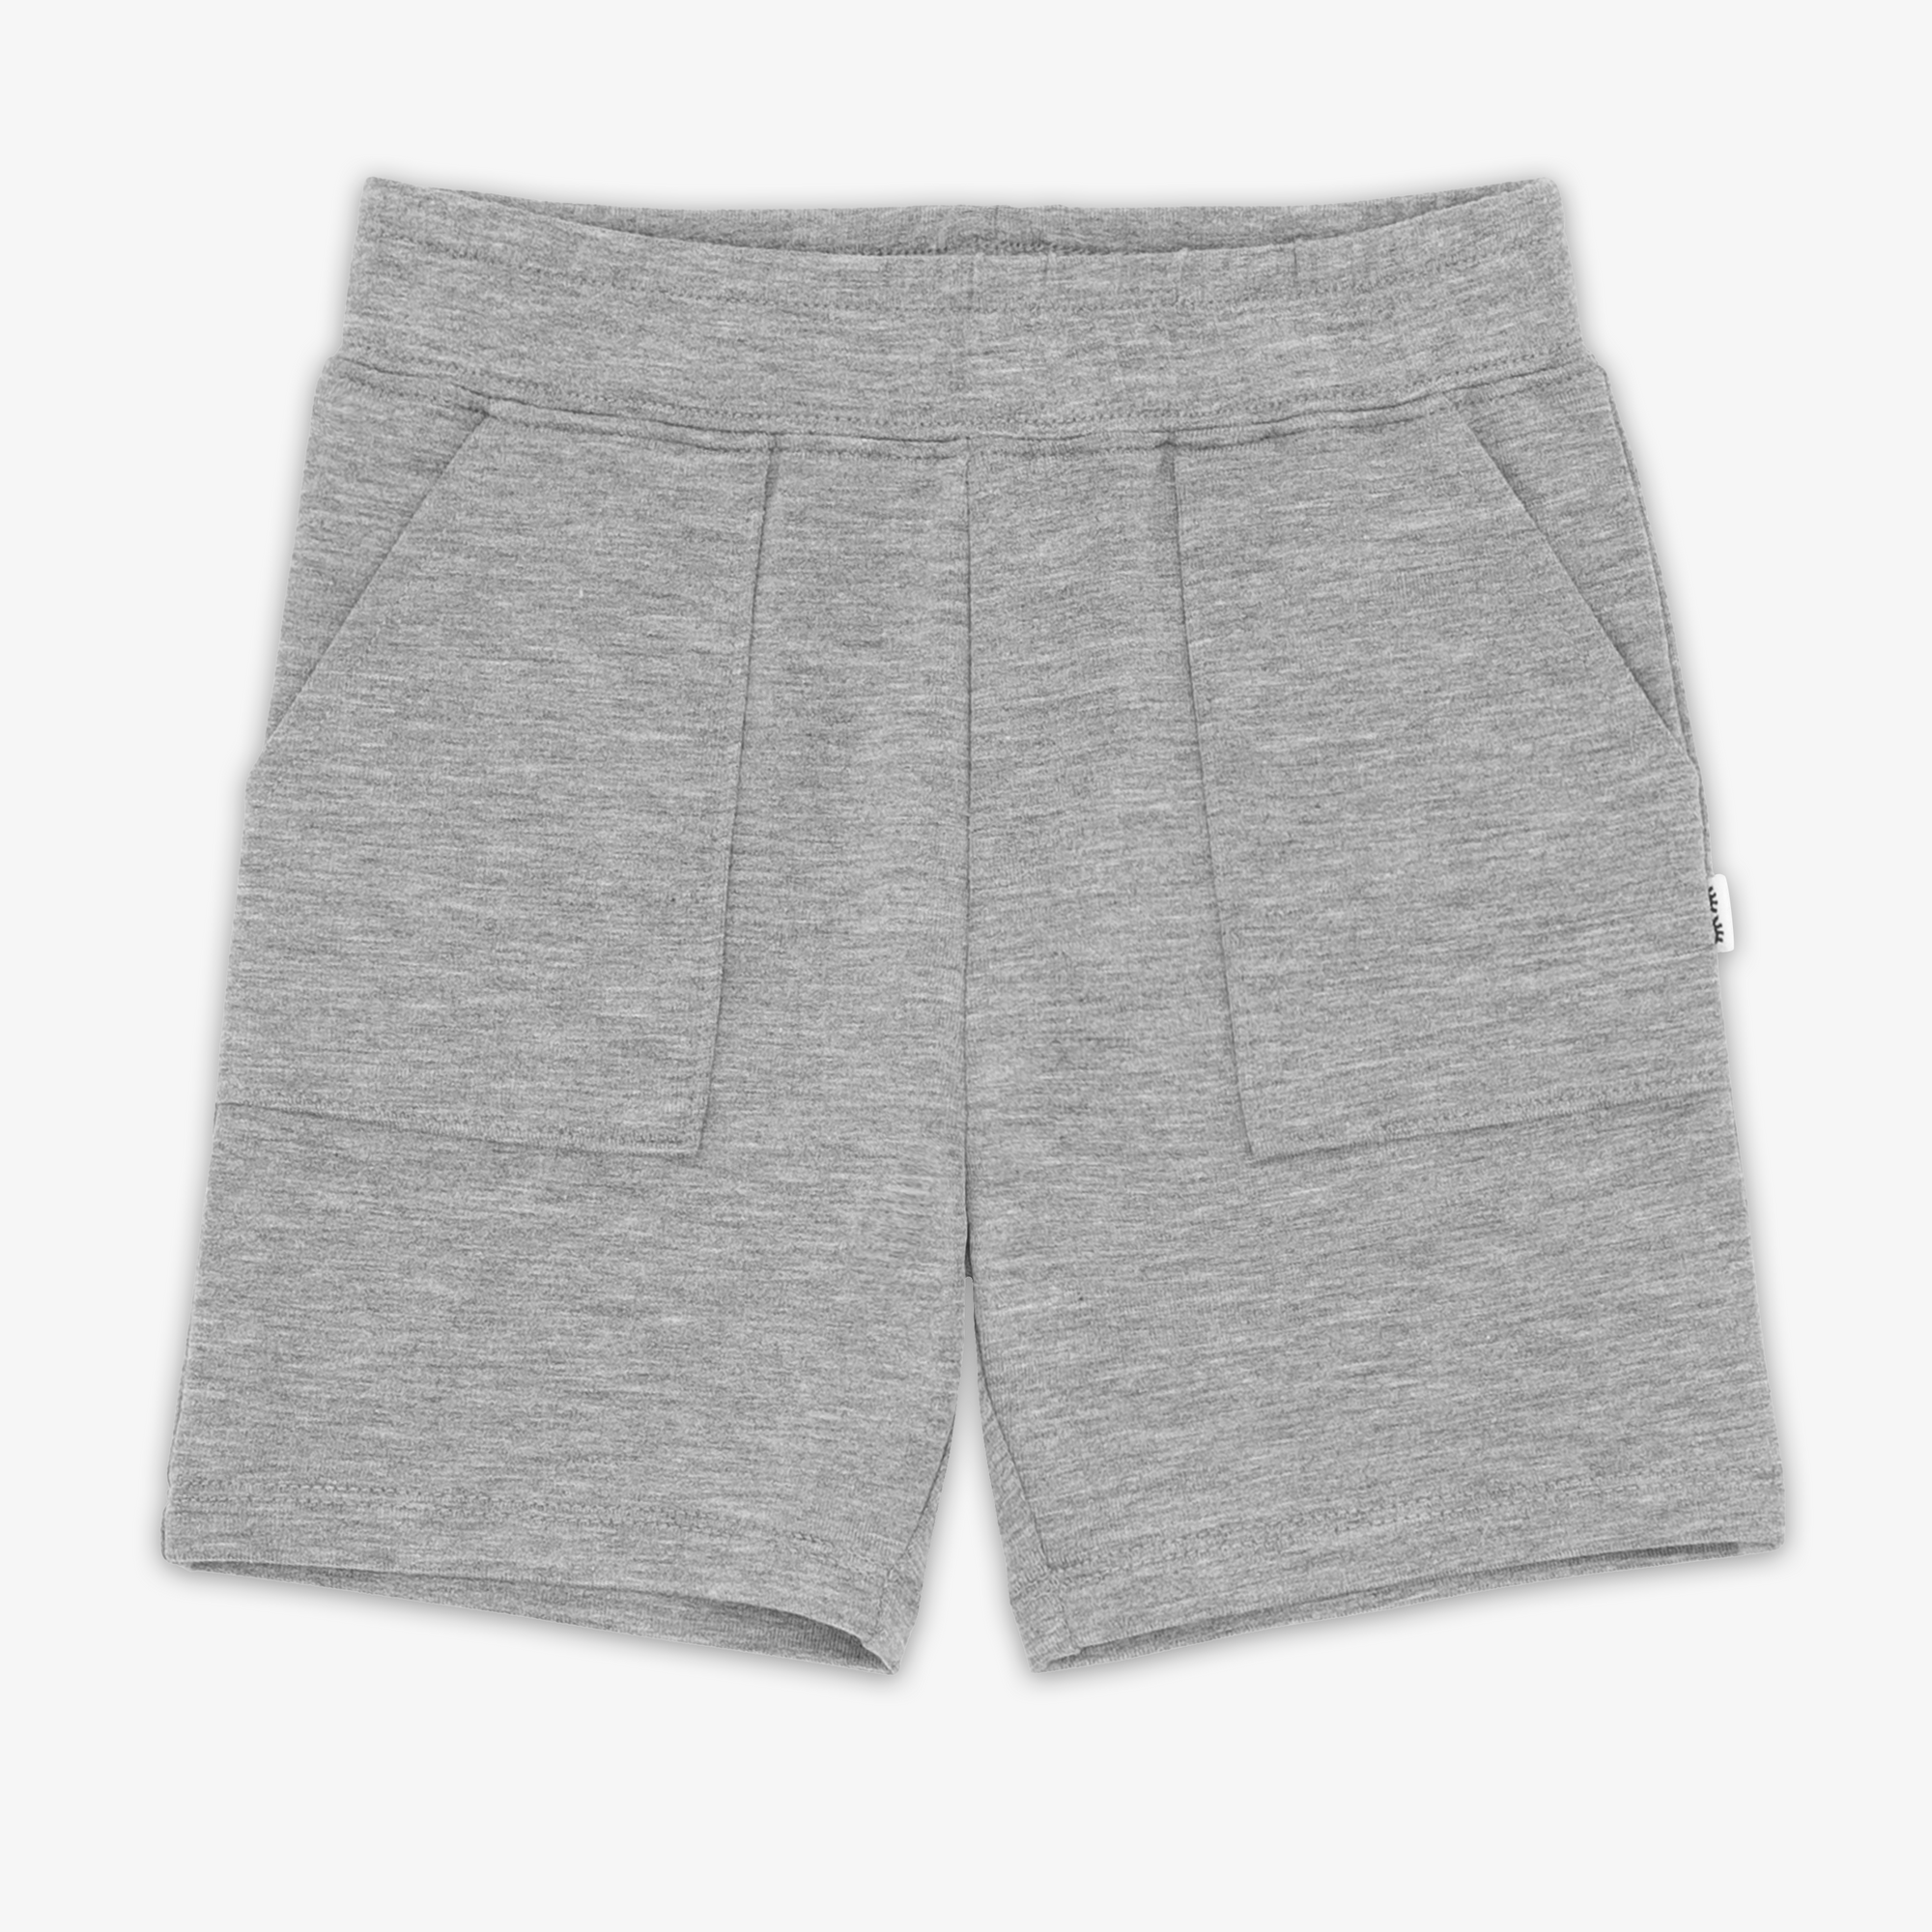 Flat lay image of the Heather Gray Shorts